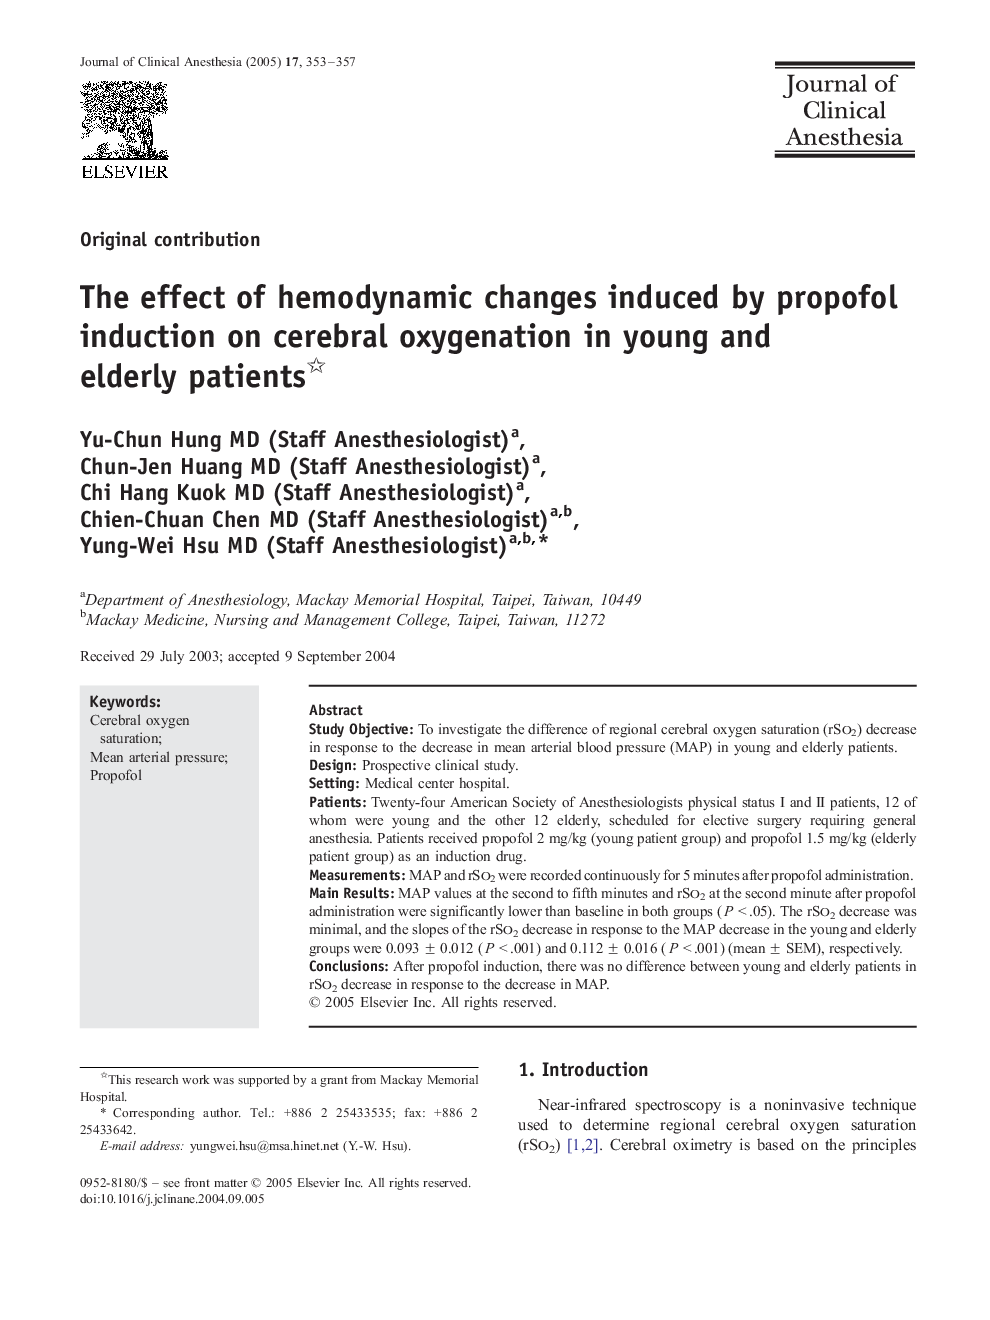 The effect of hemodynamic changes induced by propofol induction on cerebral oxygenation in young and elderly patients